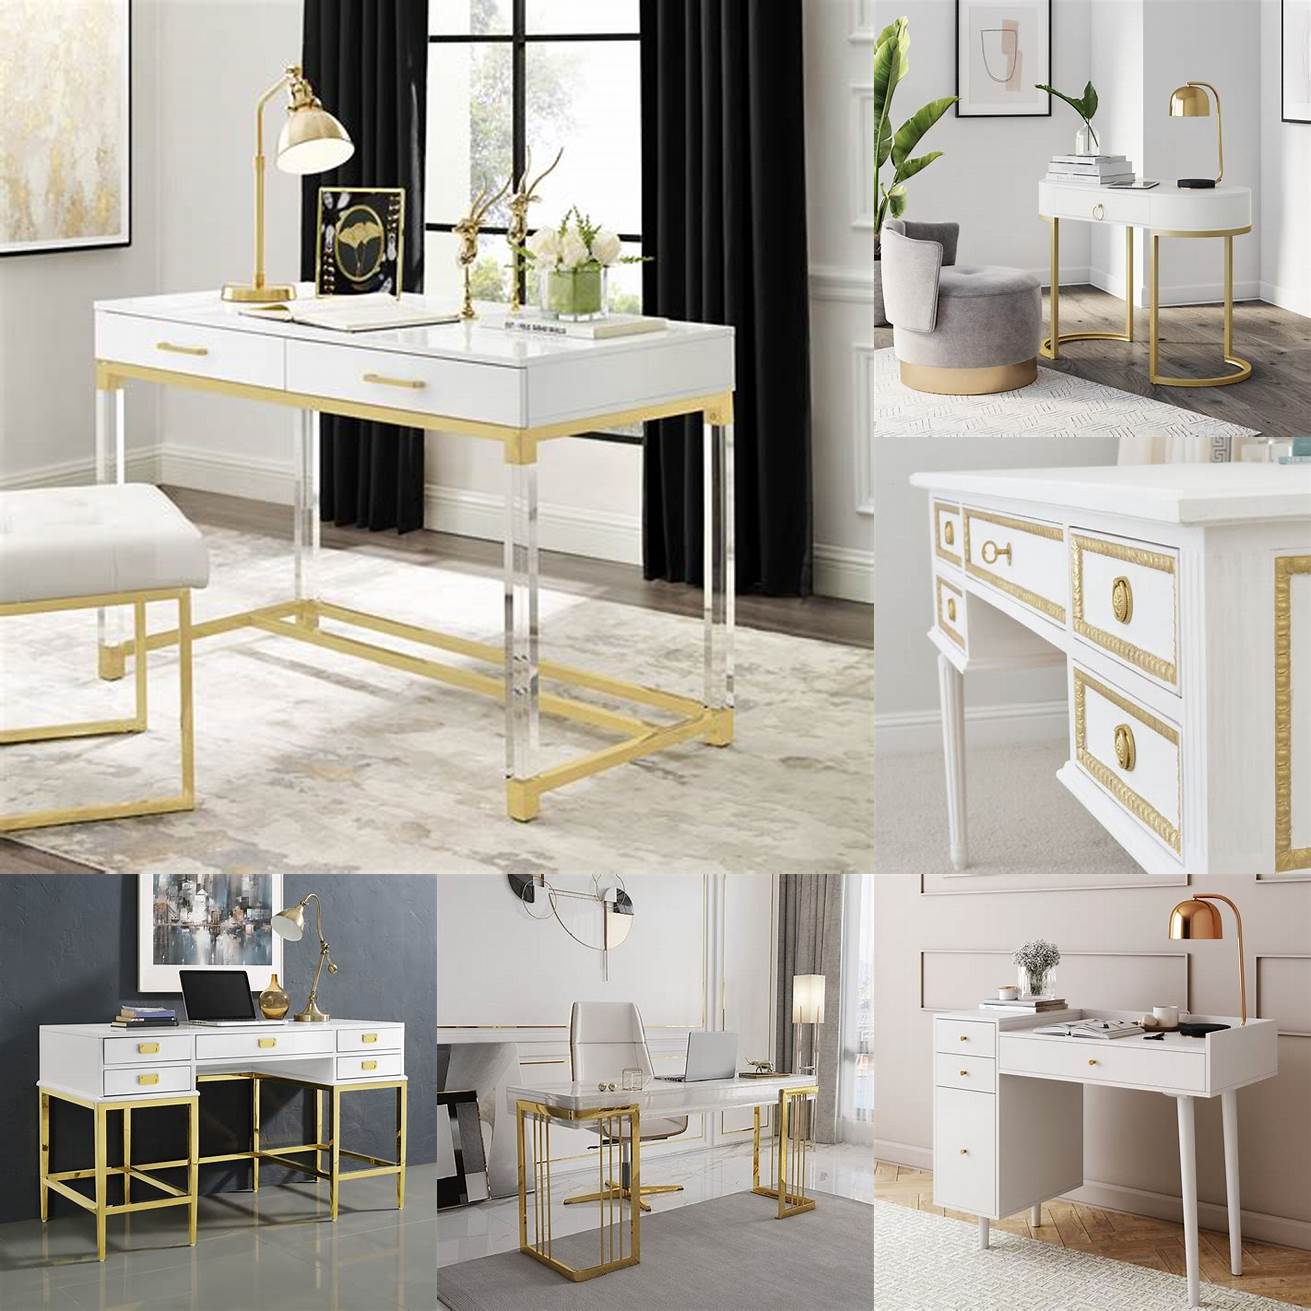 White desk with gold accents